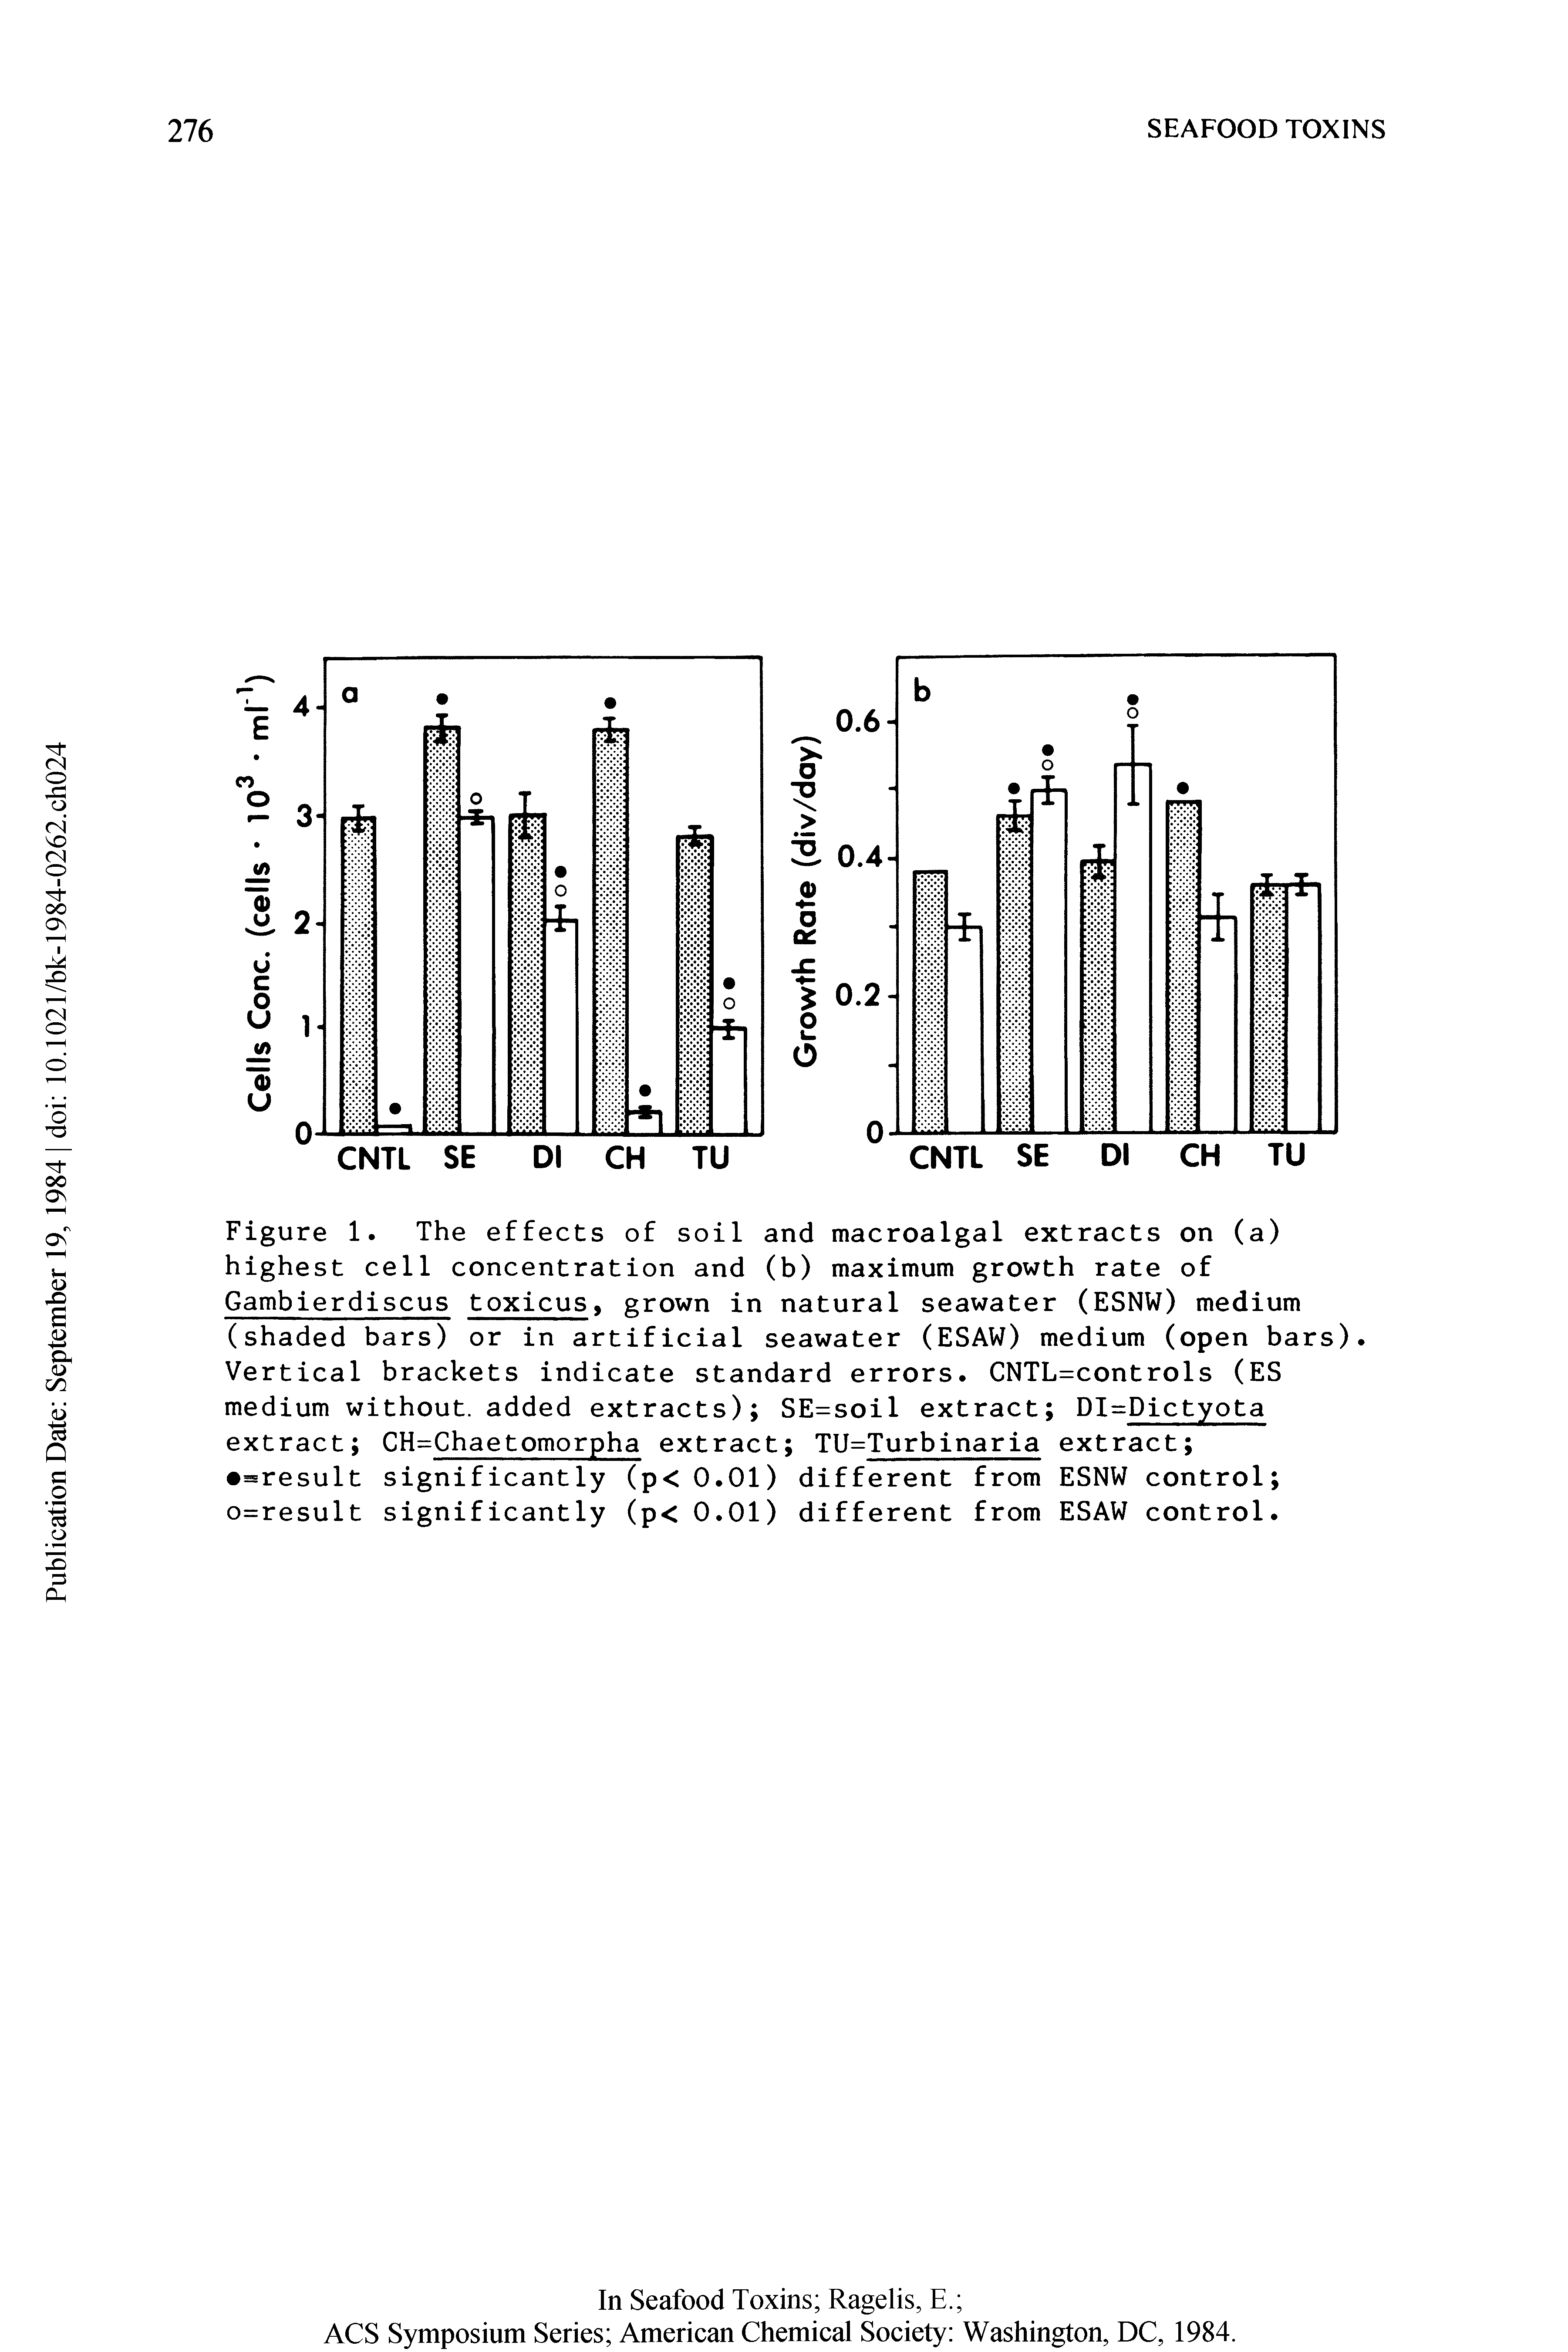 Figure 1. The effects of soil and macroalgal extracts on (a) highest cell concentration and (b) maximum growth rate of Gambierdiscus toxicus, grown in natural seawater (ESNW) medium (shaded bars) or in artificial seawater (ESAW) medium (open bars). Vertical brackets indicate standard errors. CNTL=controls (ES medium without, added extracts) SE soil extract DI=Dictyota extract CH=Chaetomorpha extract TU Turbinaria extract ...